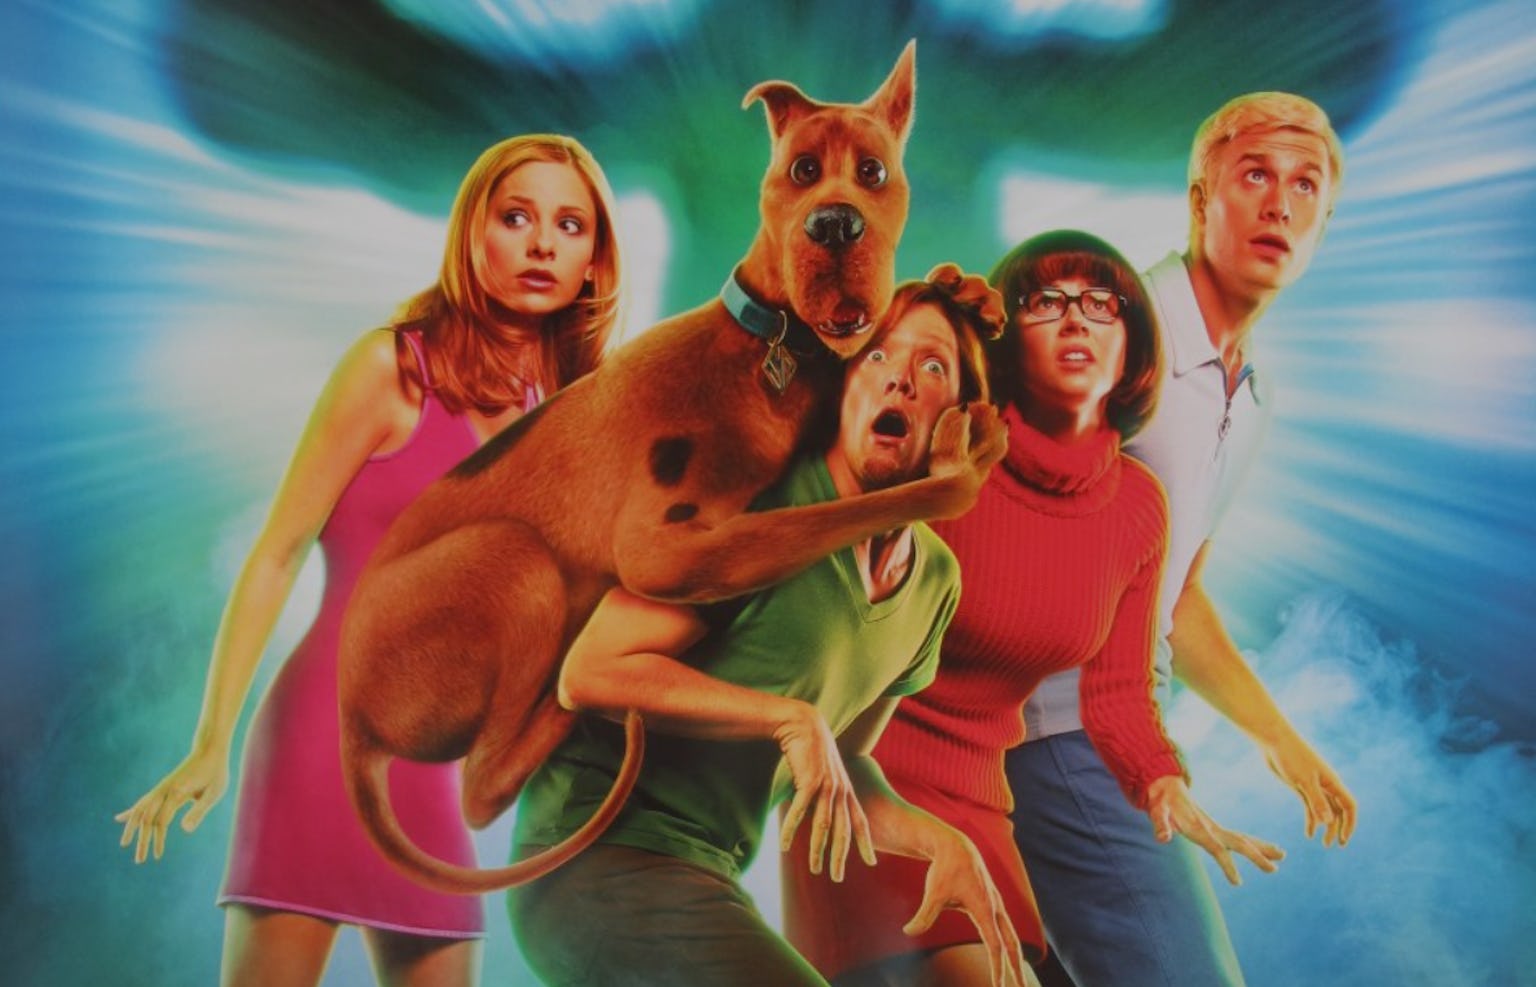 Netflix 'Scooby-Doo' July 2018: In Defense of the Poorly Reviewed 2002 Film